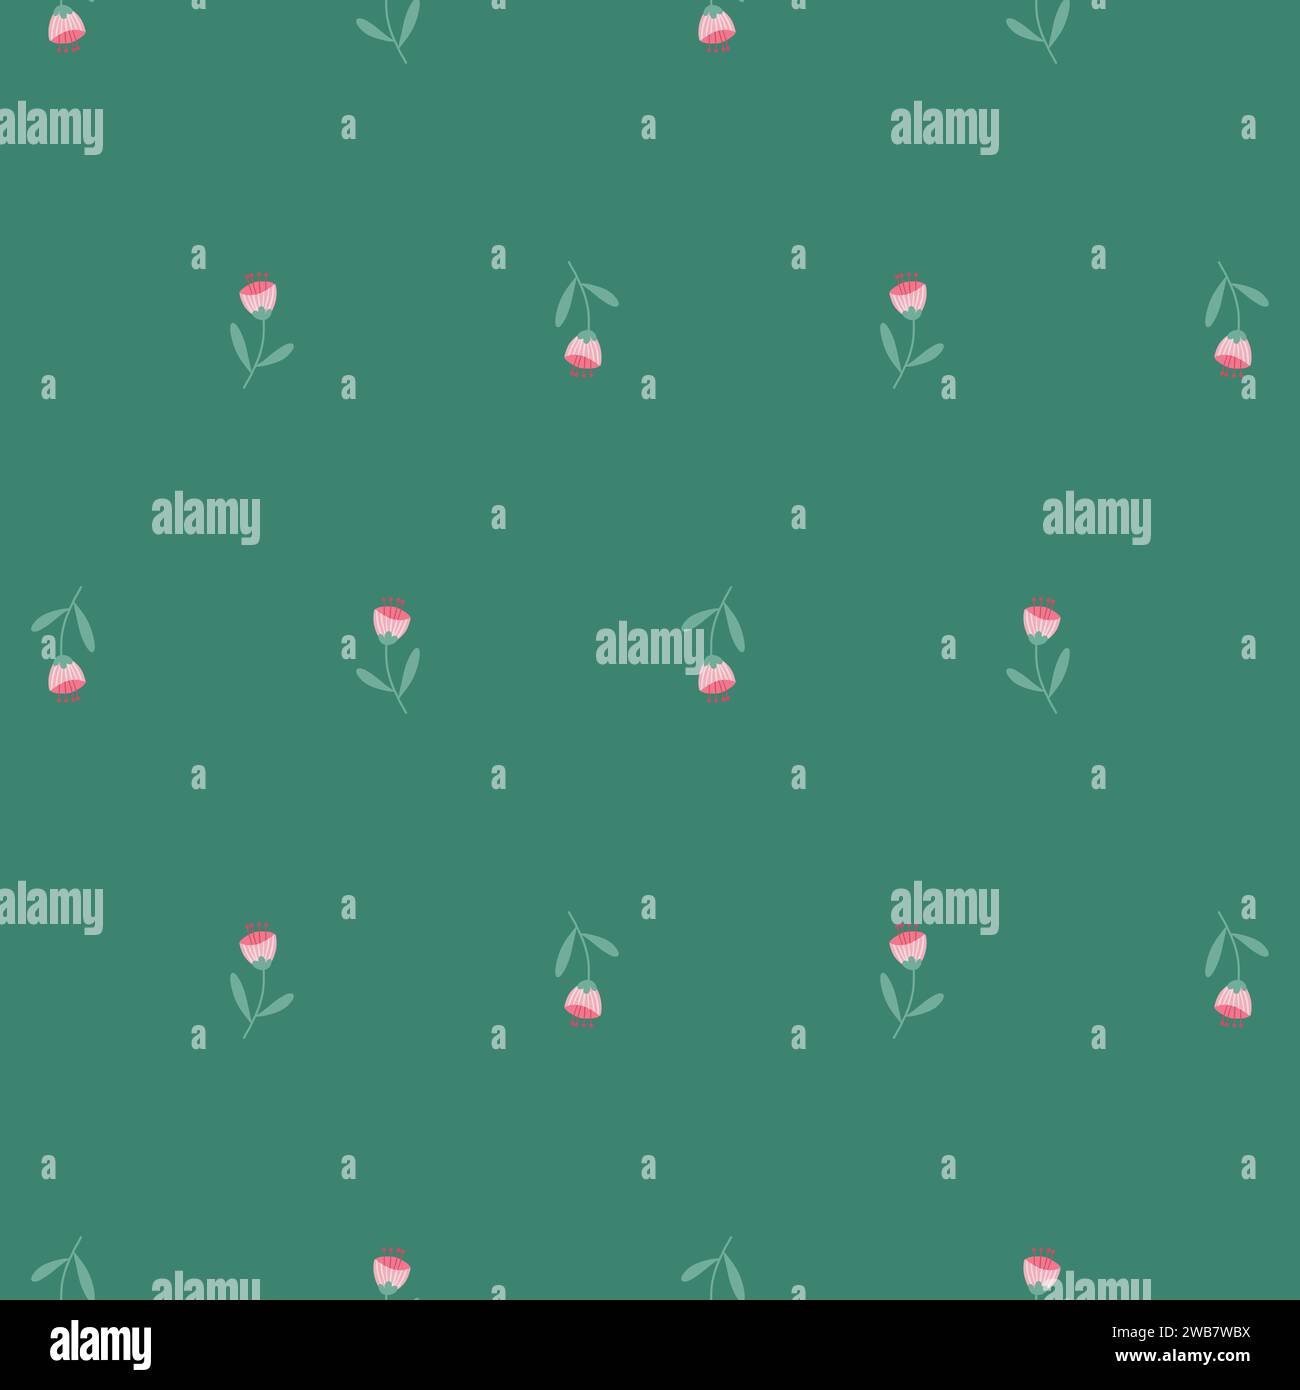 Floral Seamless Pattern of Sparse Pink Tiny Flowers on Viridian Green Background. Wallpaper Design for Textiles, Fabrics, Papers Prints, Fashion Backgrounds, Wrappings, Packaging. Stock Vector